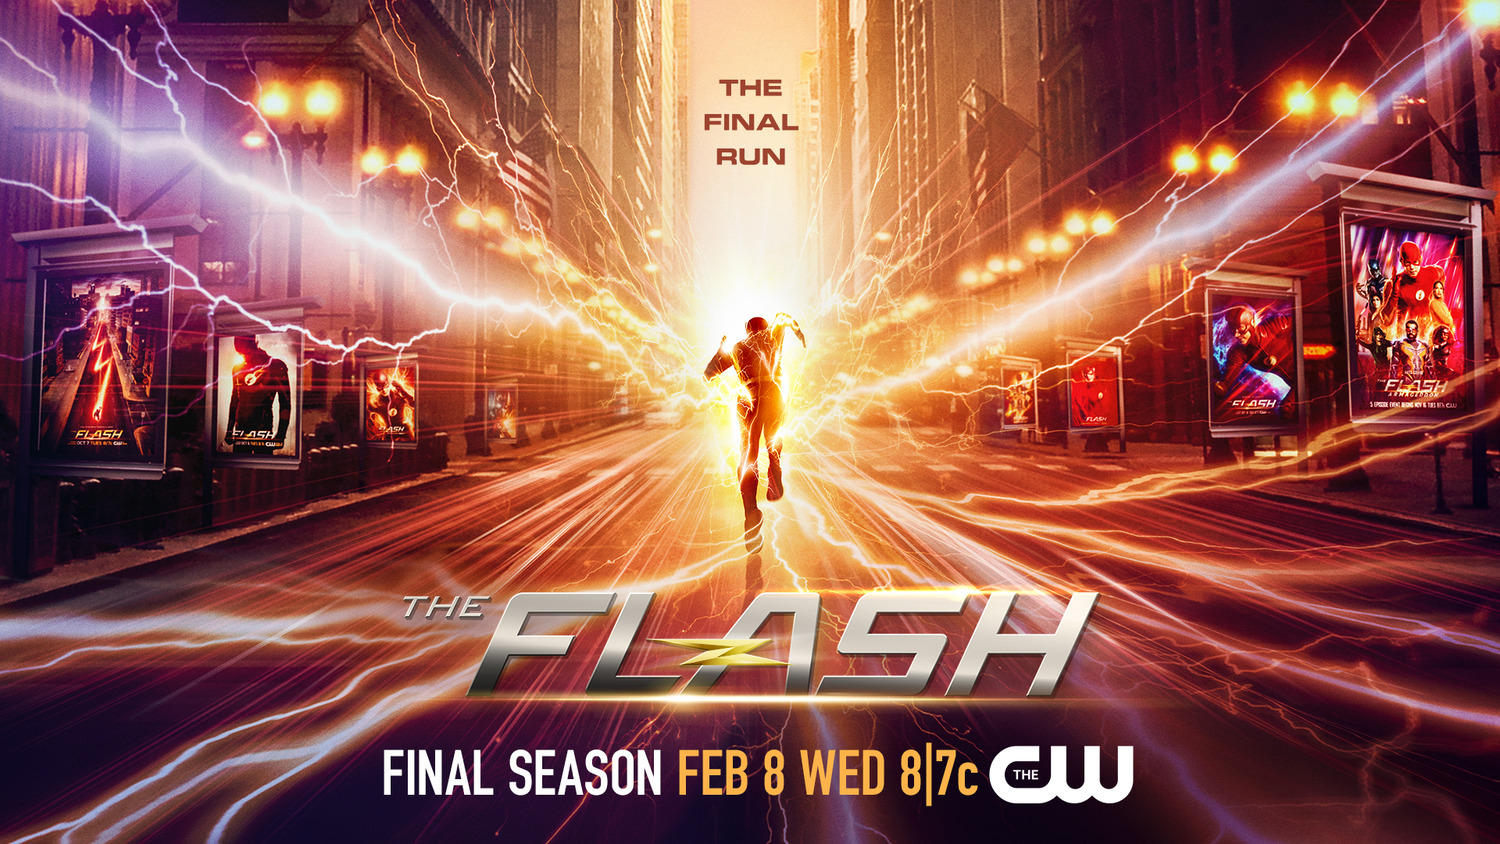 Extra Large TV Poster Image for The Flash (#58 of 65)